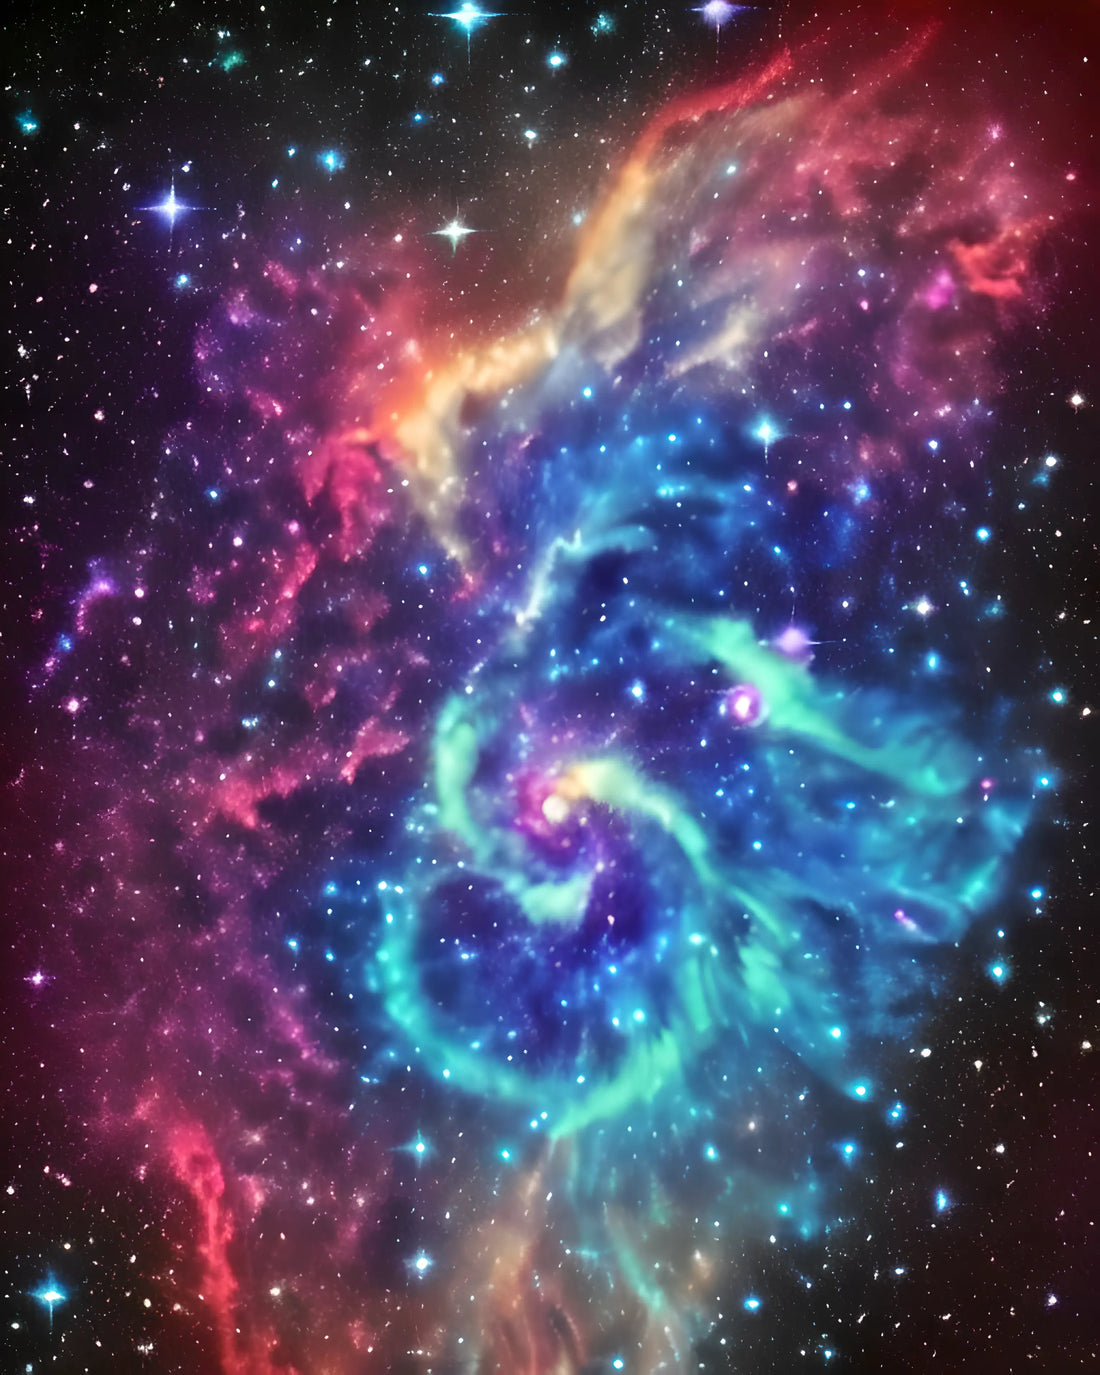 Hydrogen being shown here as the main chemical element in a nebula explosion of many colors.